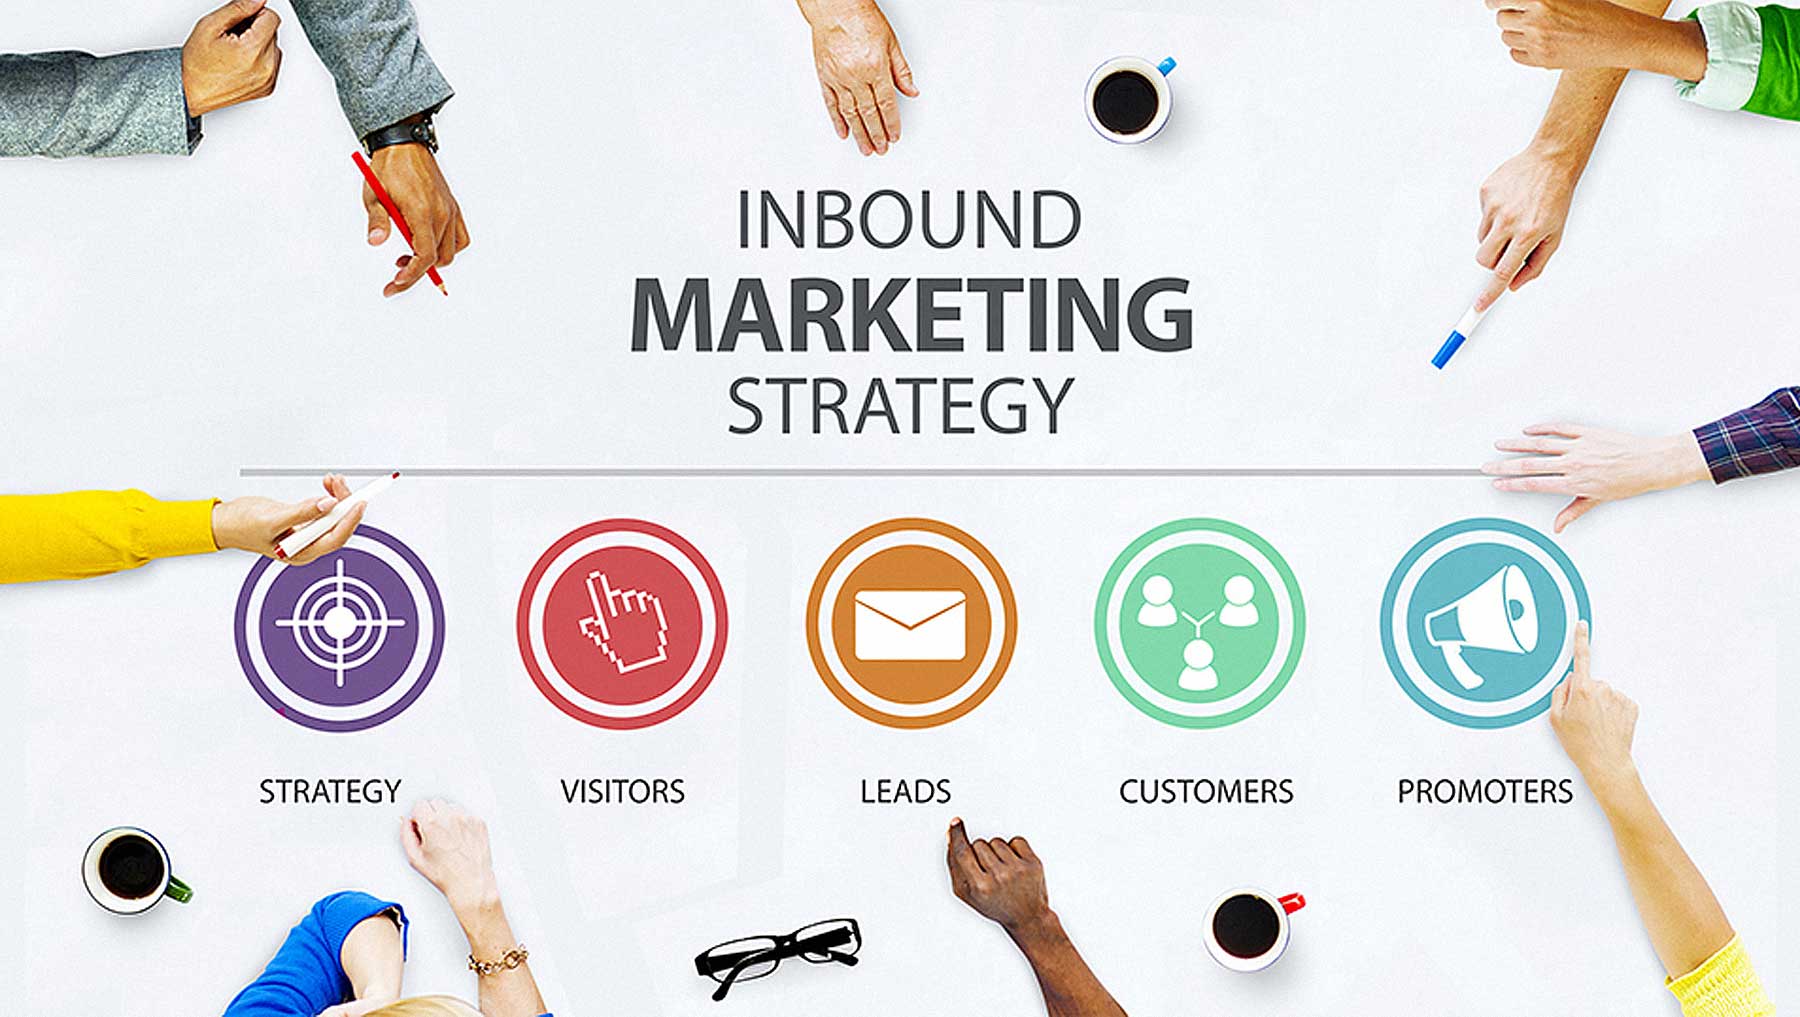 5 Common Myths about Inbound Marketing